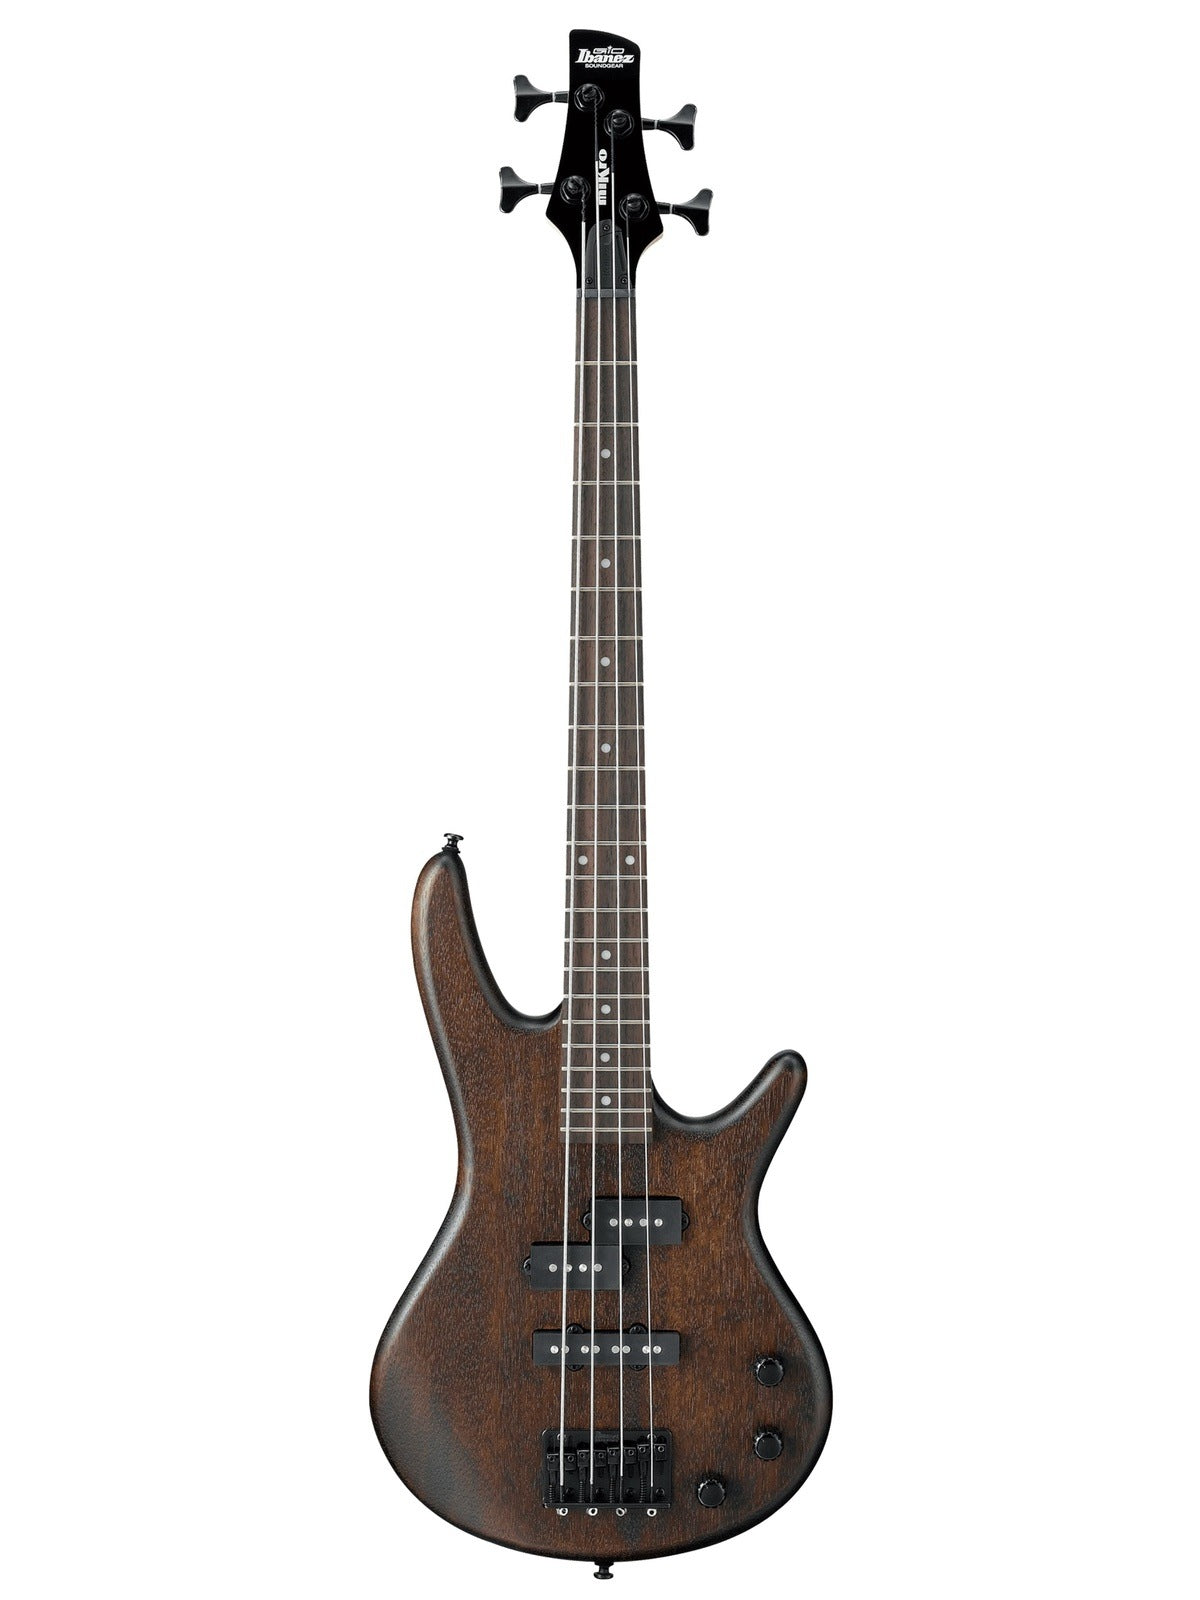 Ibanez GRSM20 miKro 4-String Electric Bass